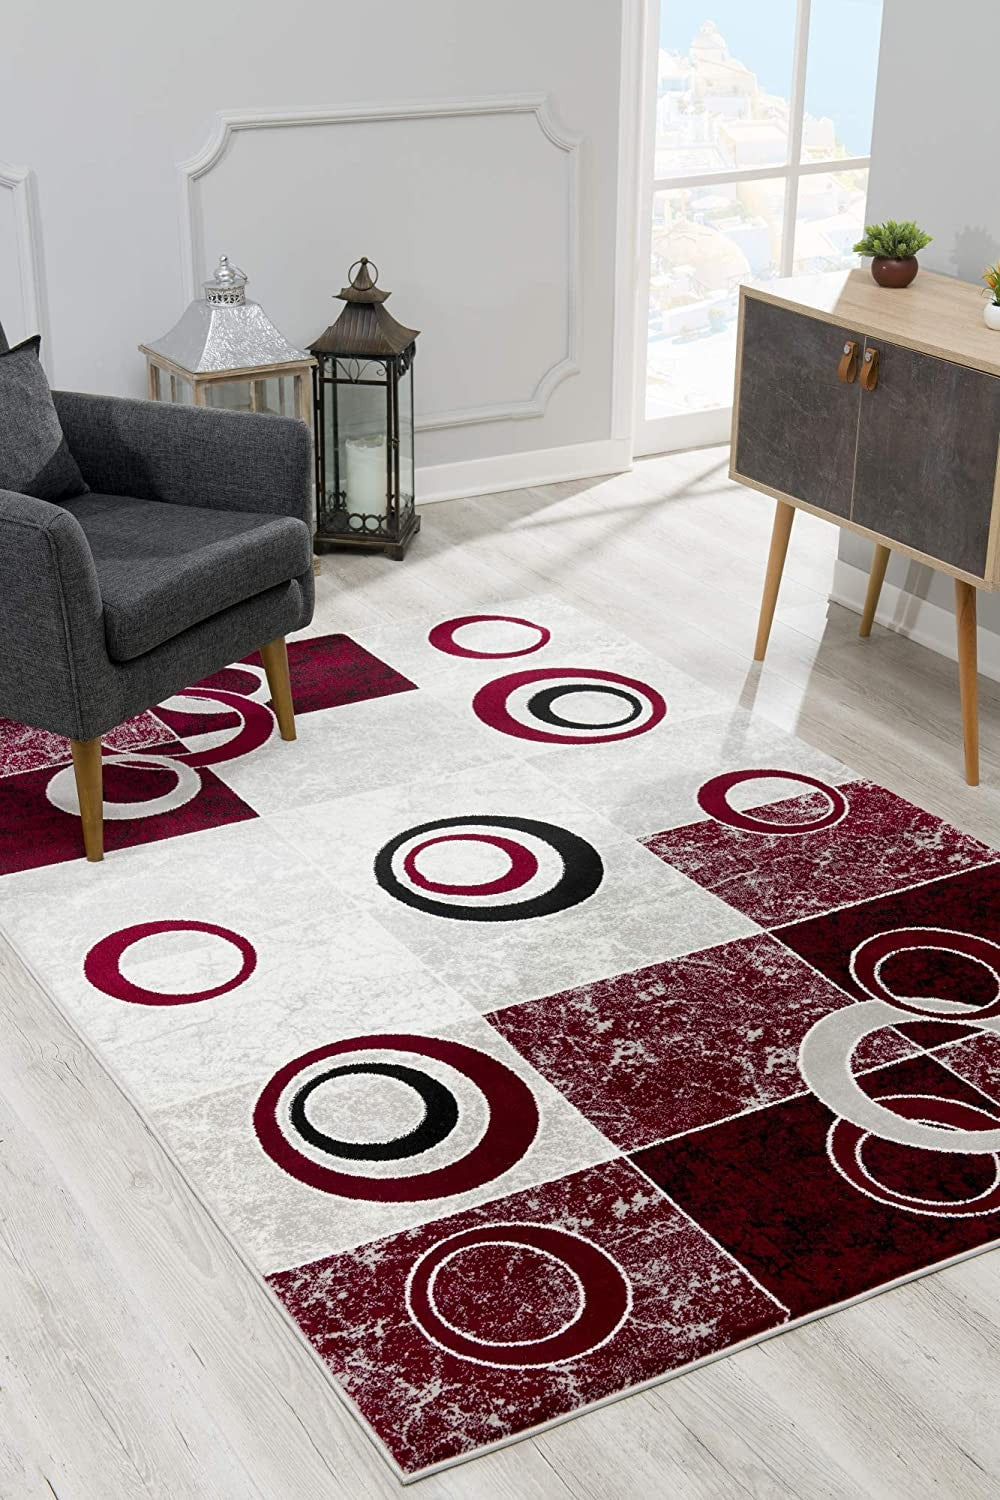 2’ X 10’ Red And White Inverse Circles Runner Rug